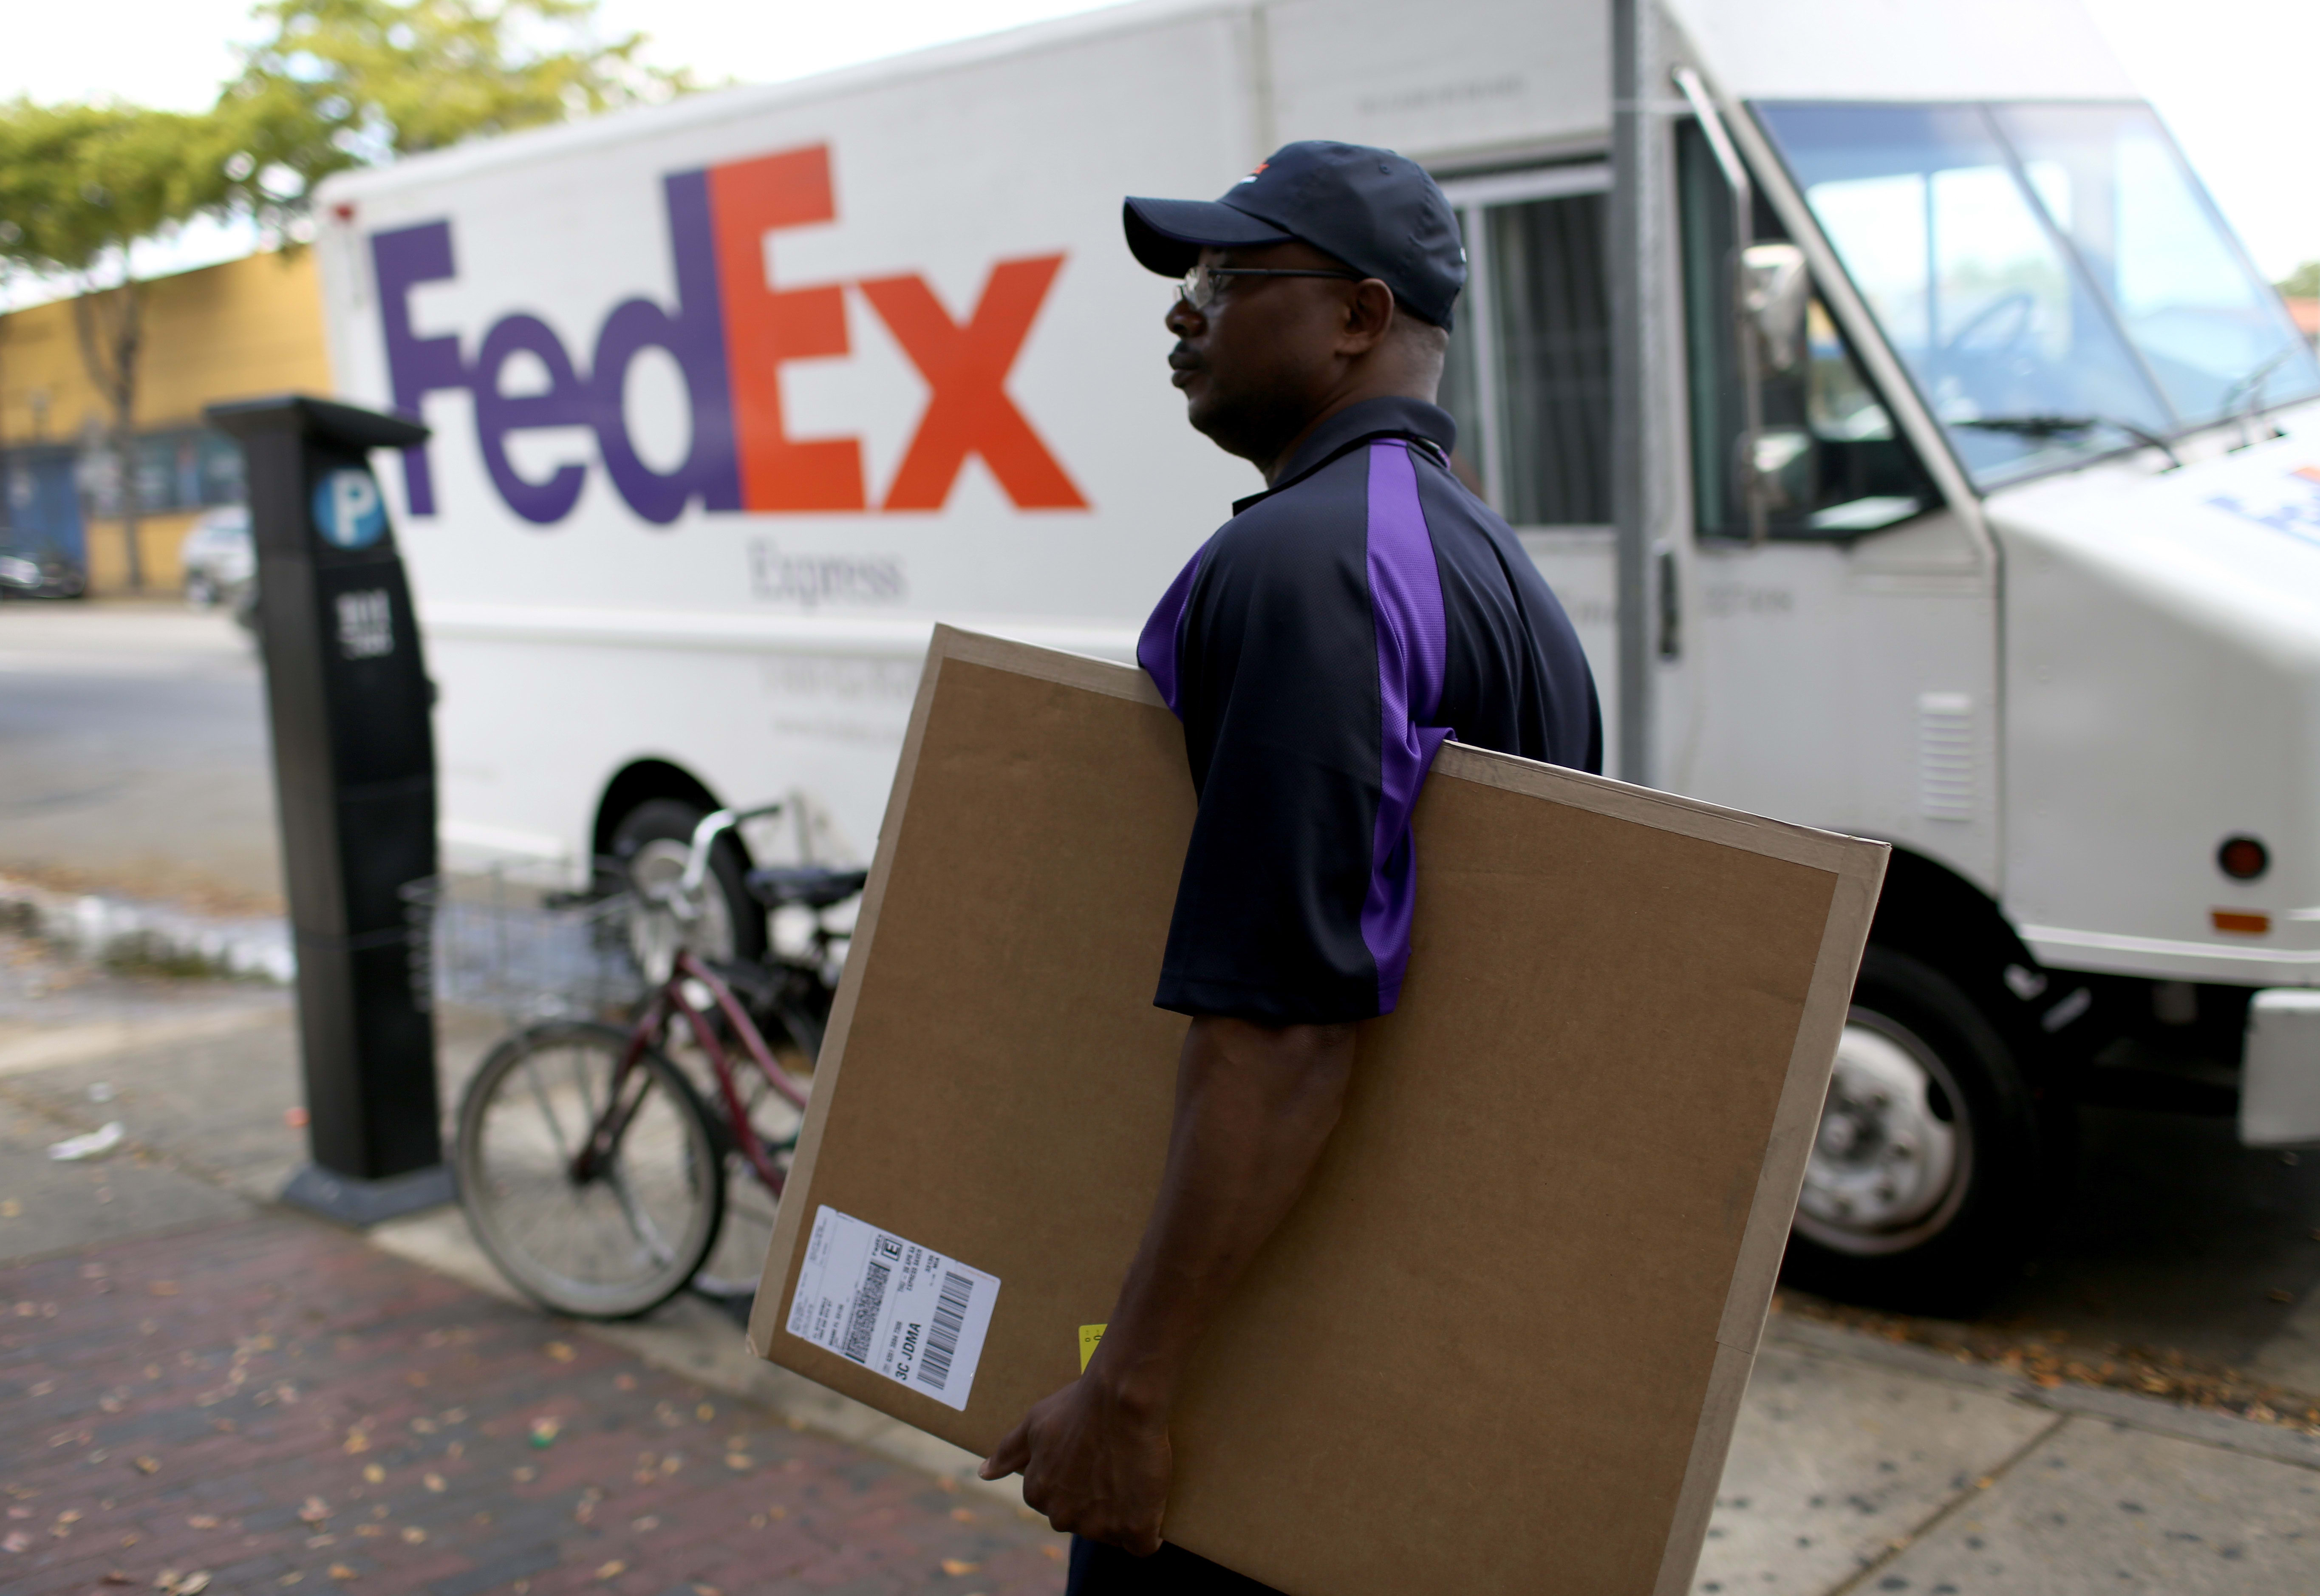 FedEx blasts New York Times tax cut article, challenges publisher to debate